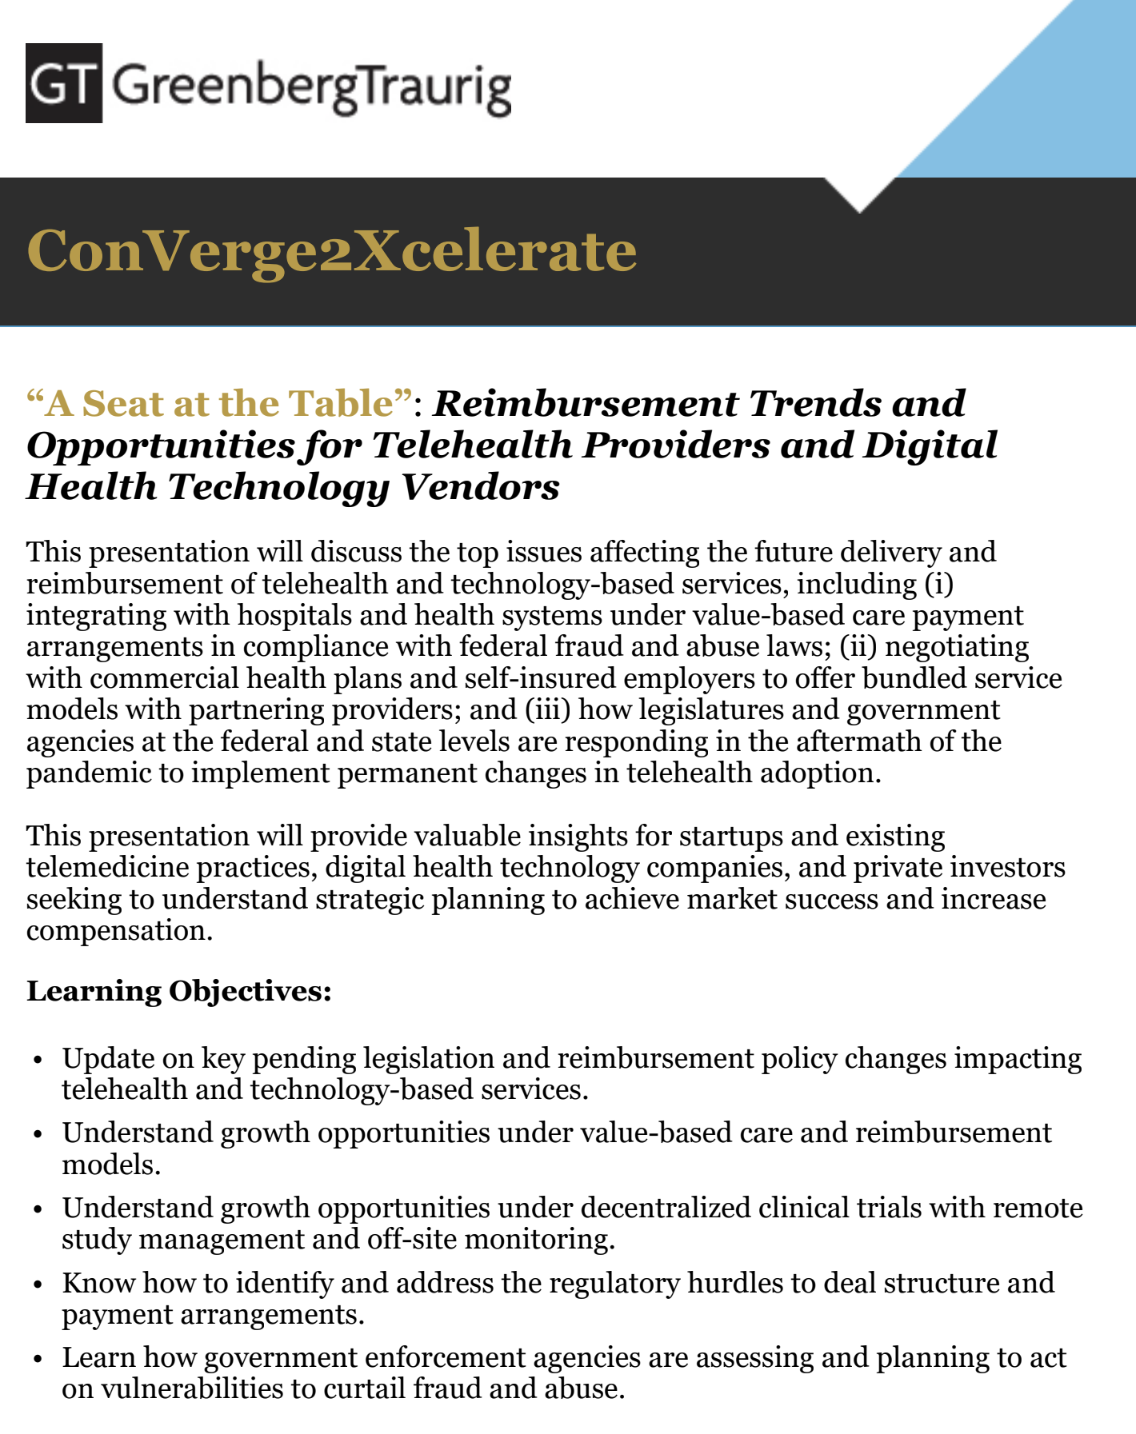 "A Seat at the Table": Reimbursement Trends and Opportunities for Telehealth Providers and Digital Health Technology Vendors